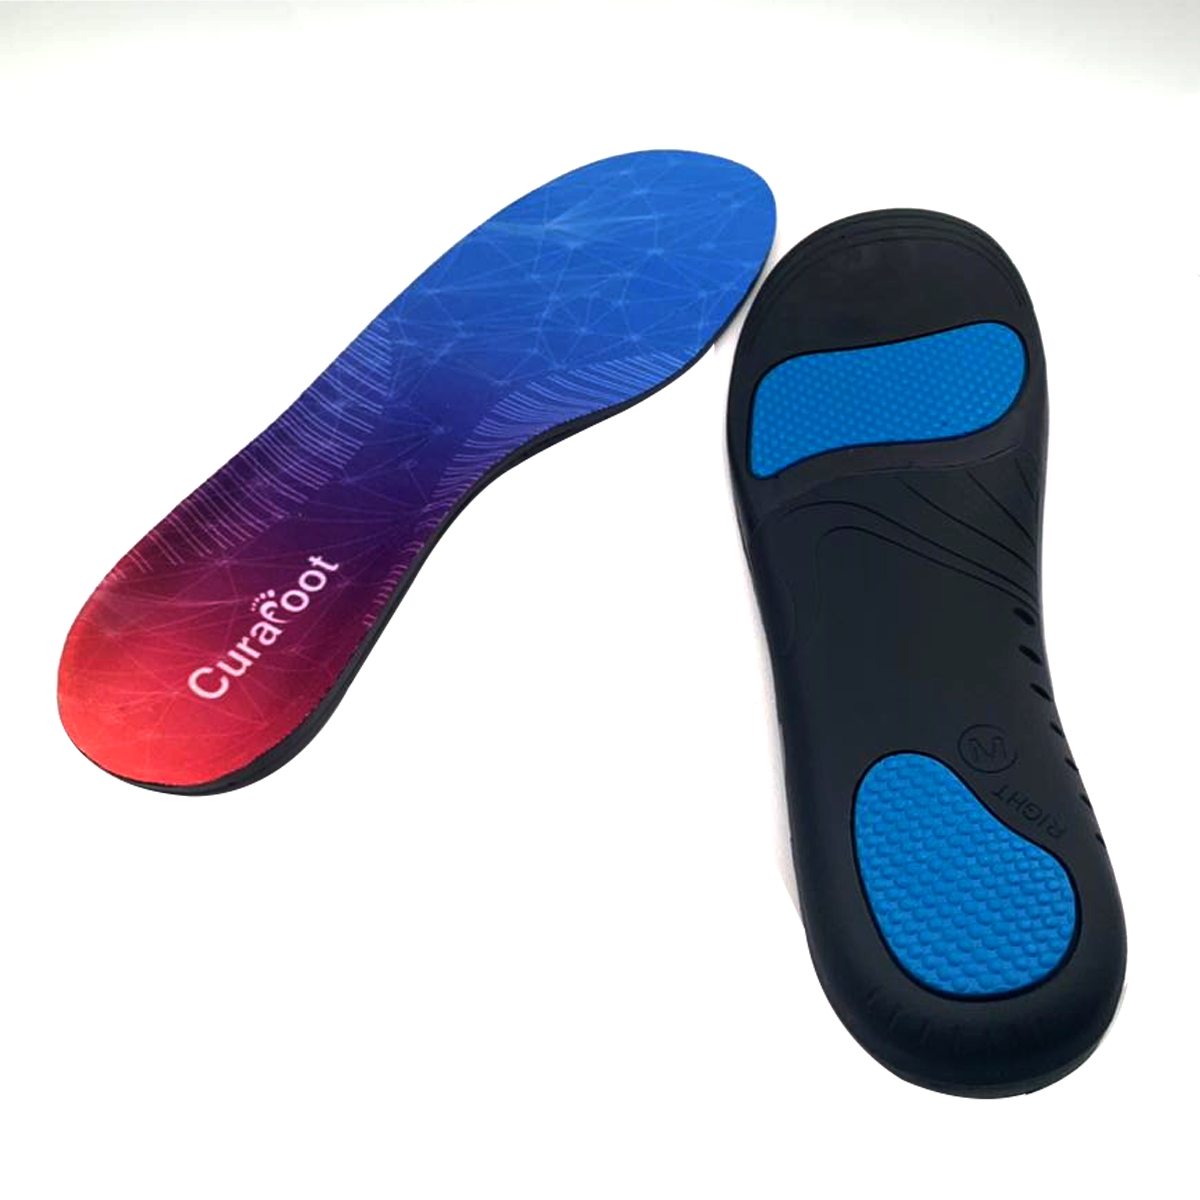 Curafoot Sports Shoe Insoles for Running and Exercising